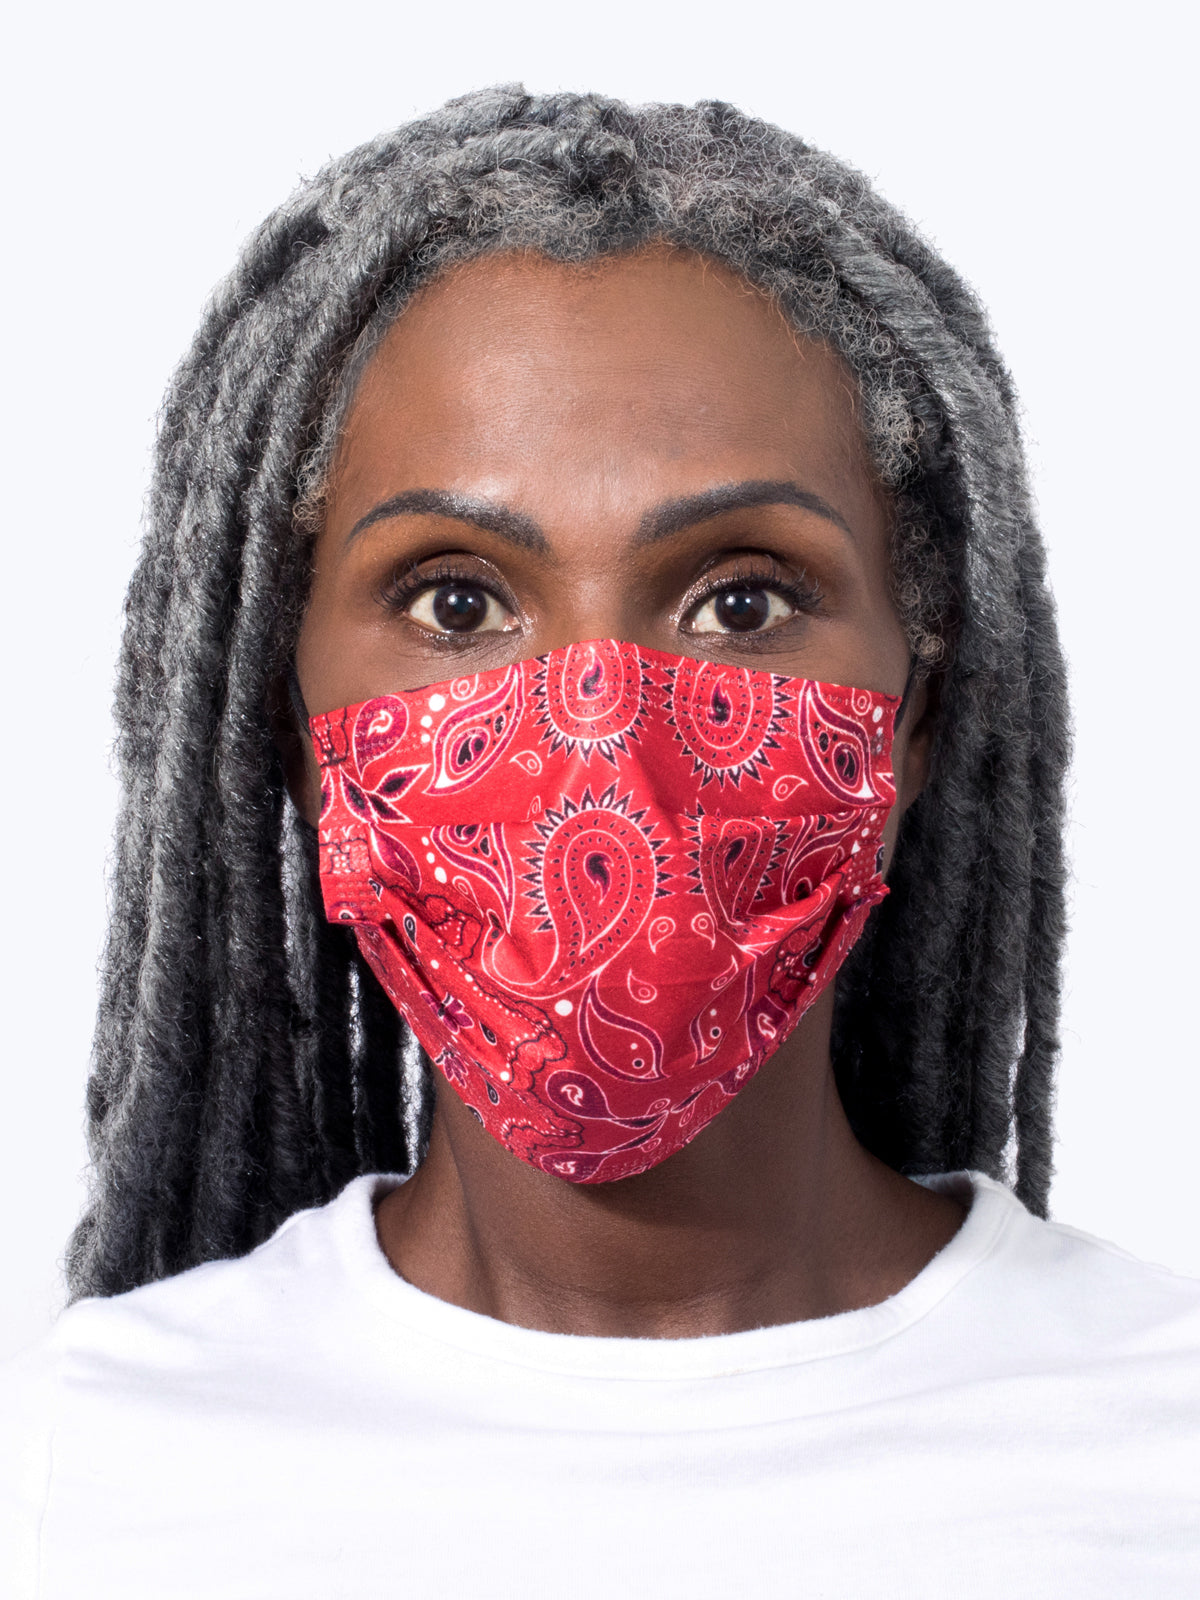 Bandana Print Red 10-Count Disposable 3-Ply Face Masks - Punch Studio